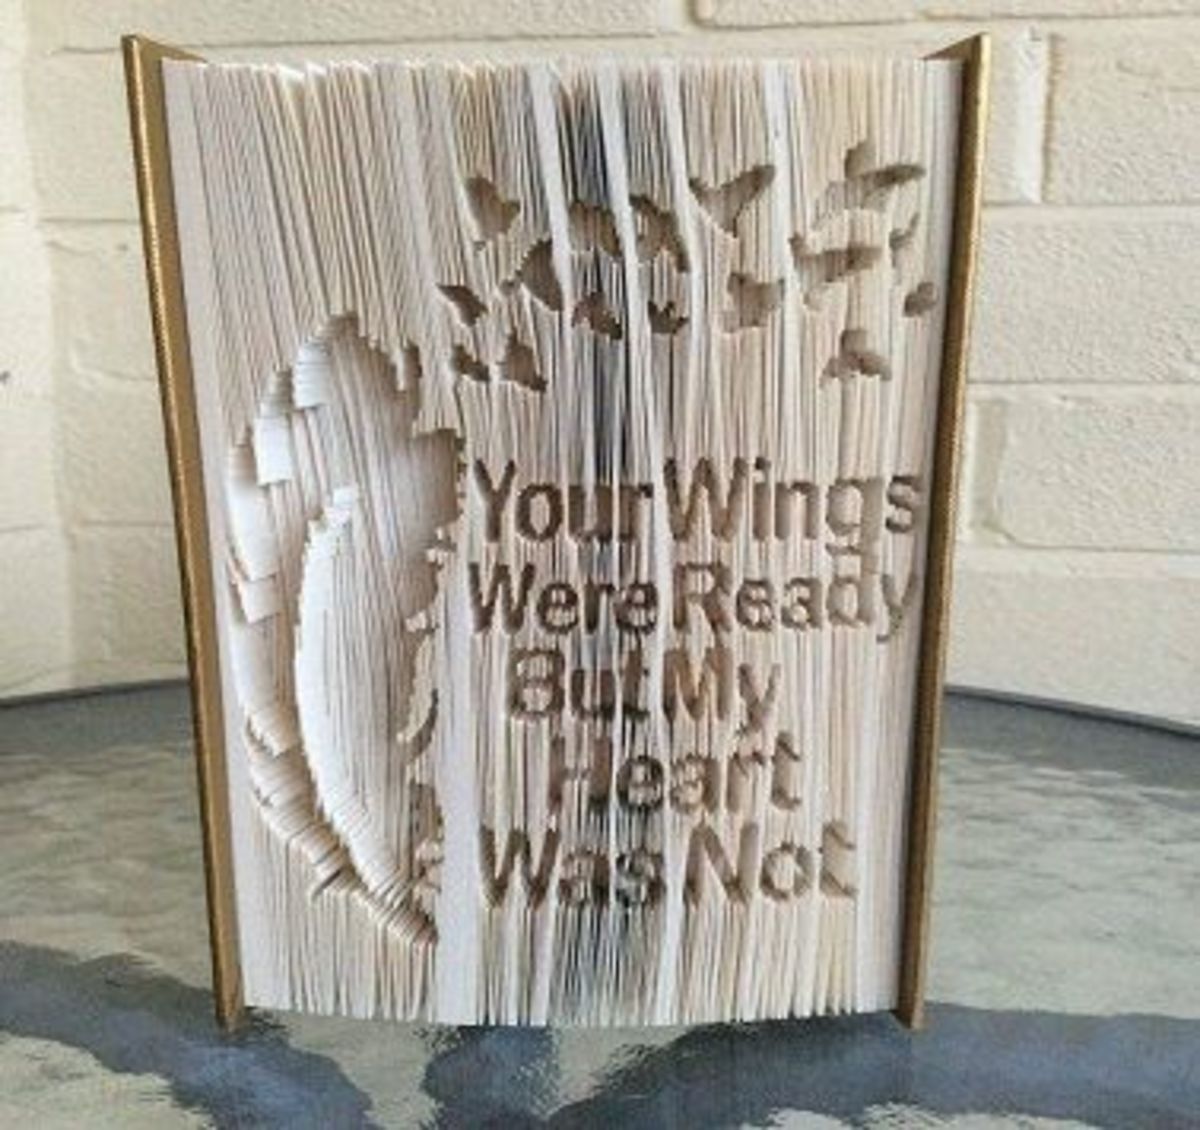 There are so many ways to express yourself through folded book art